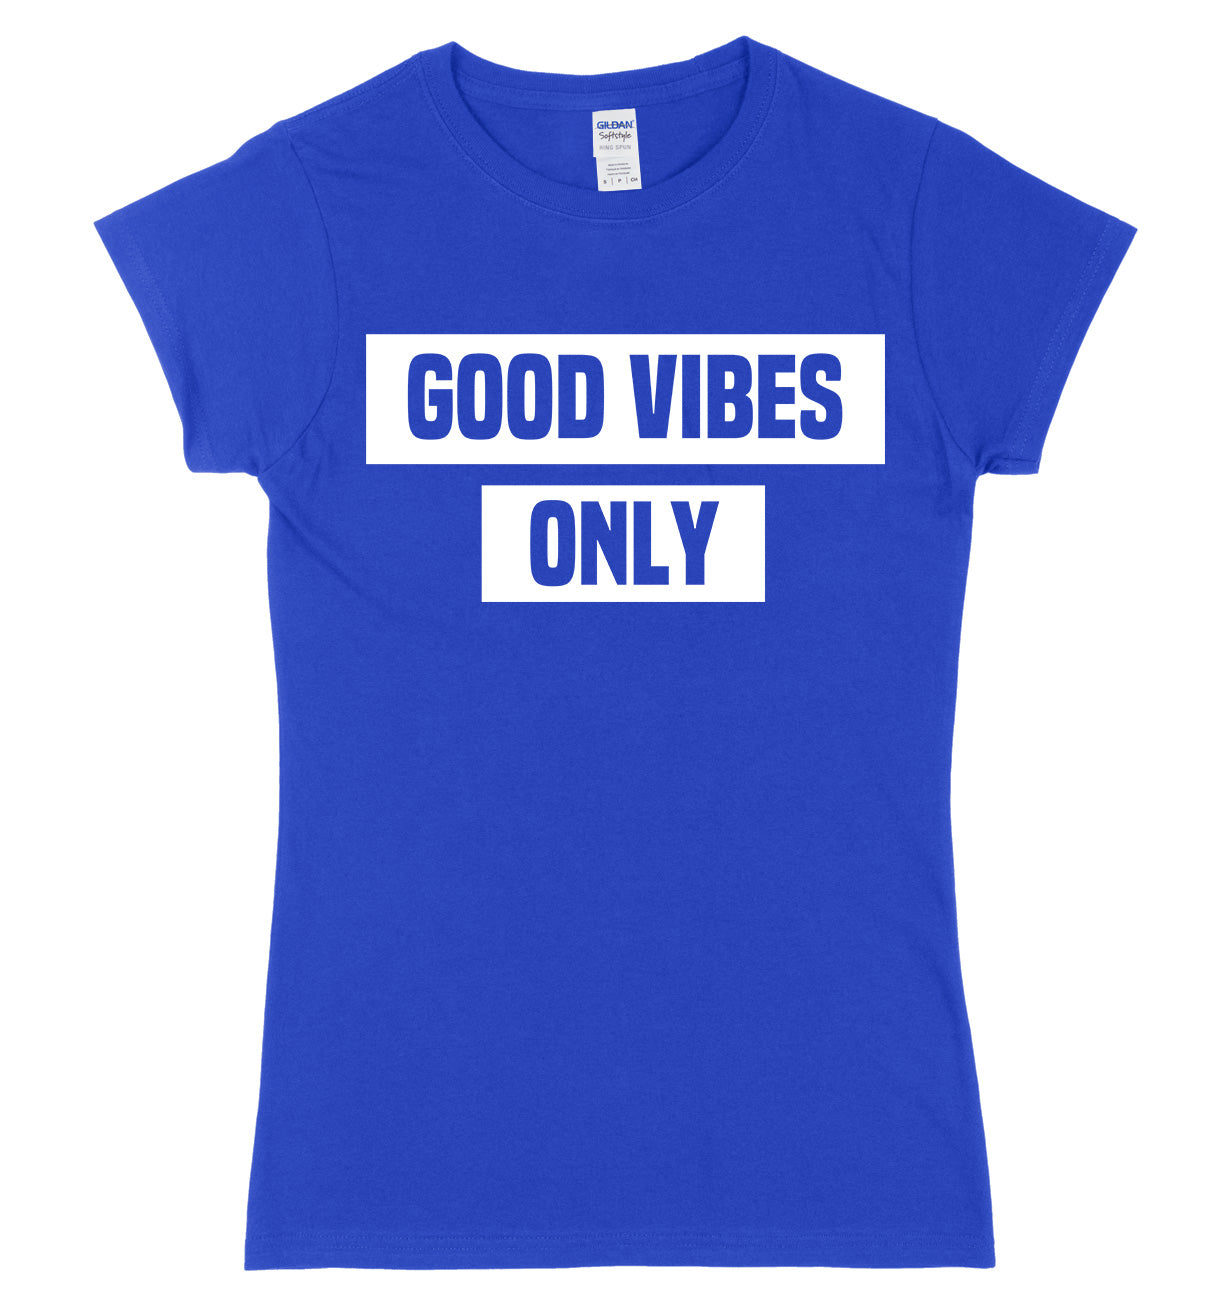 Good Vibes Only Womens Ladies Slim Fit T-Shirt